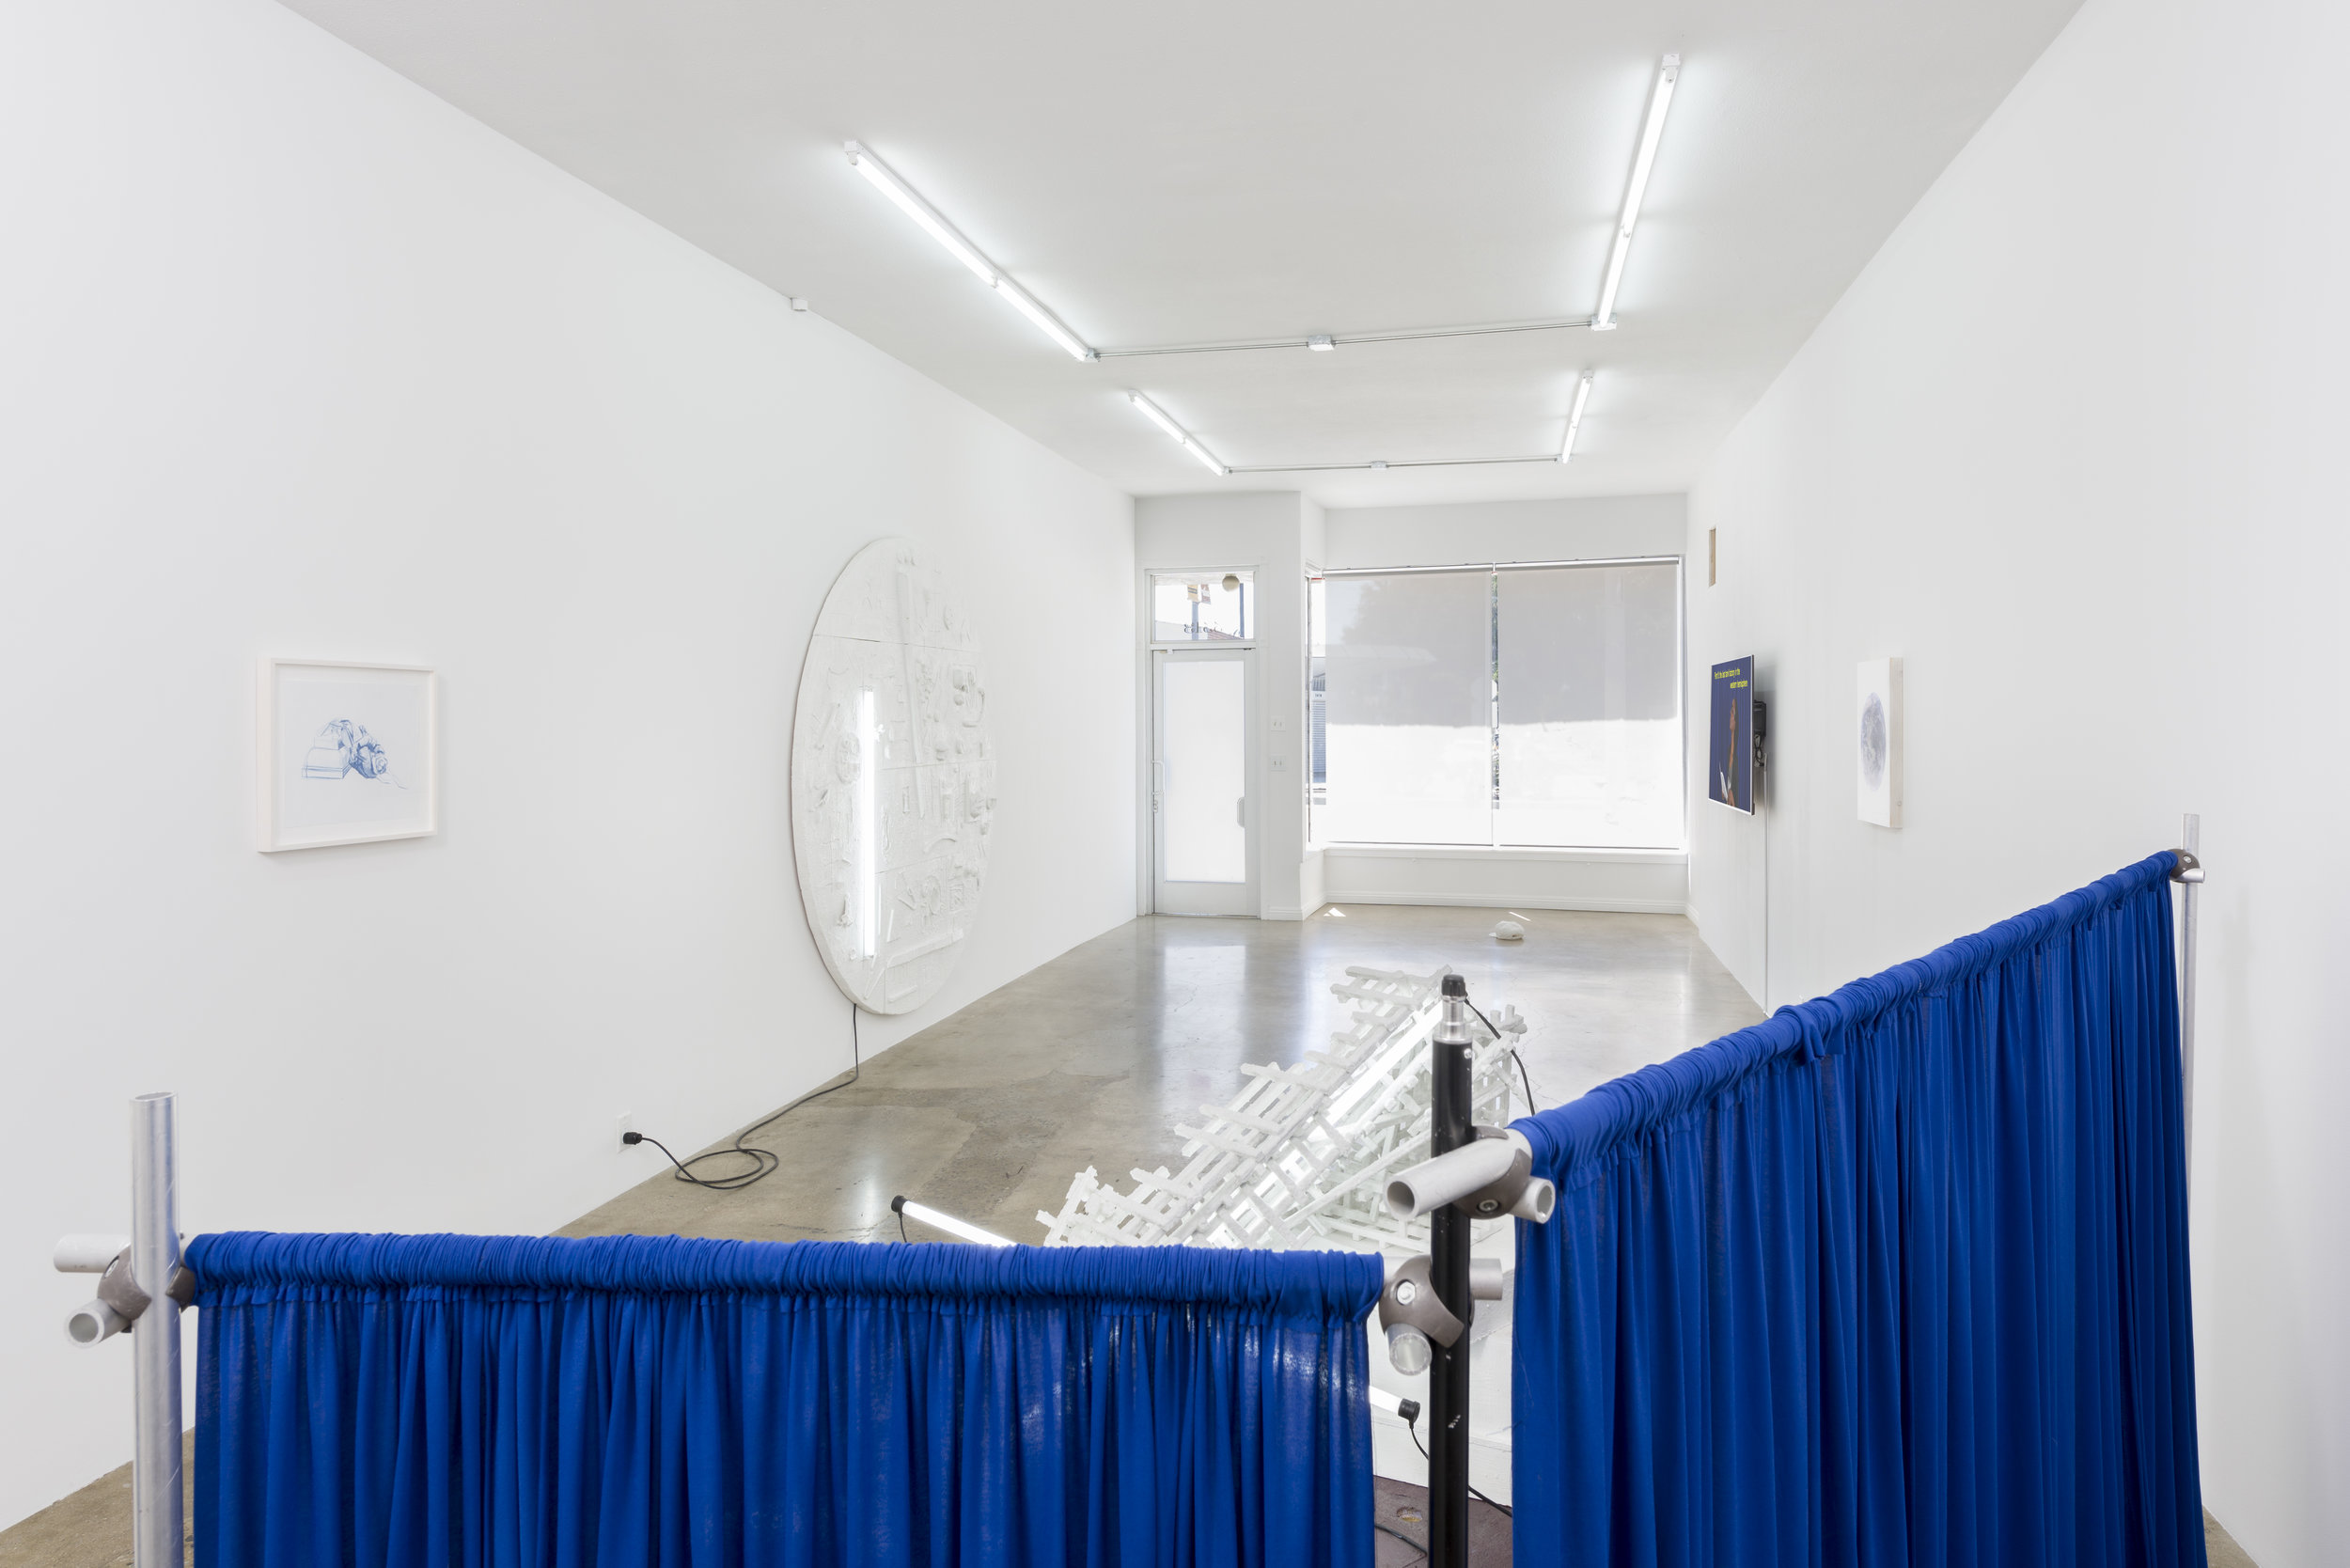  Installation view of Don Edler:  Two Minutes To Midnight   September 8 - October 27, 2019  Photo by Ruben Diaz   Link to press release.  